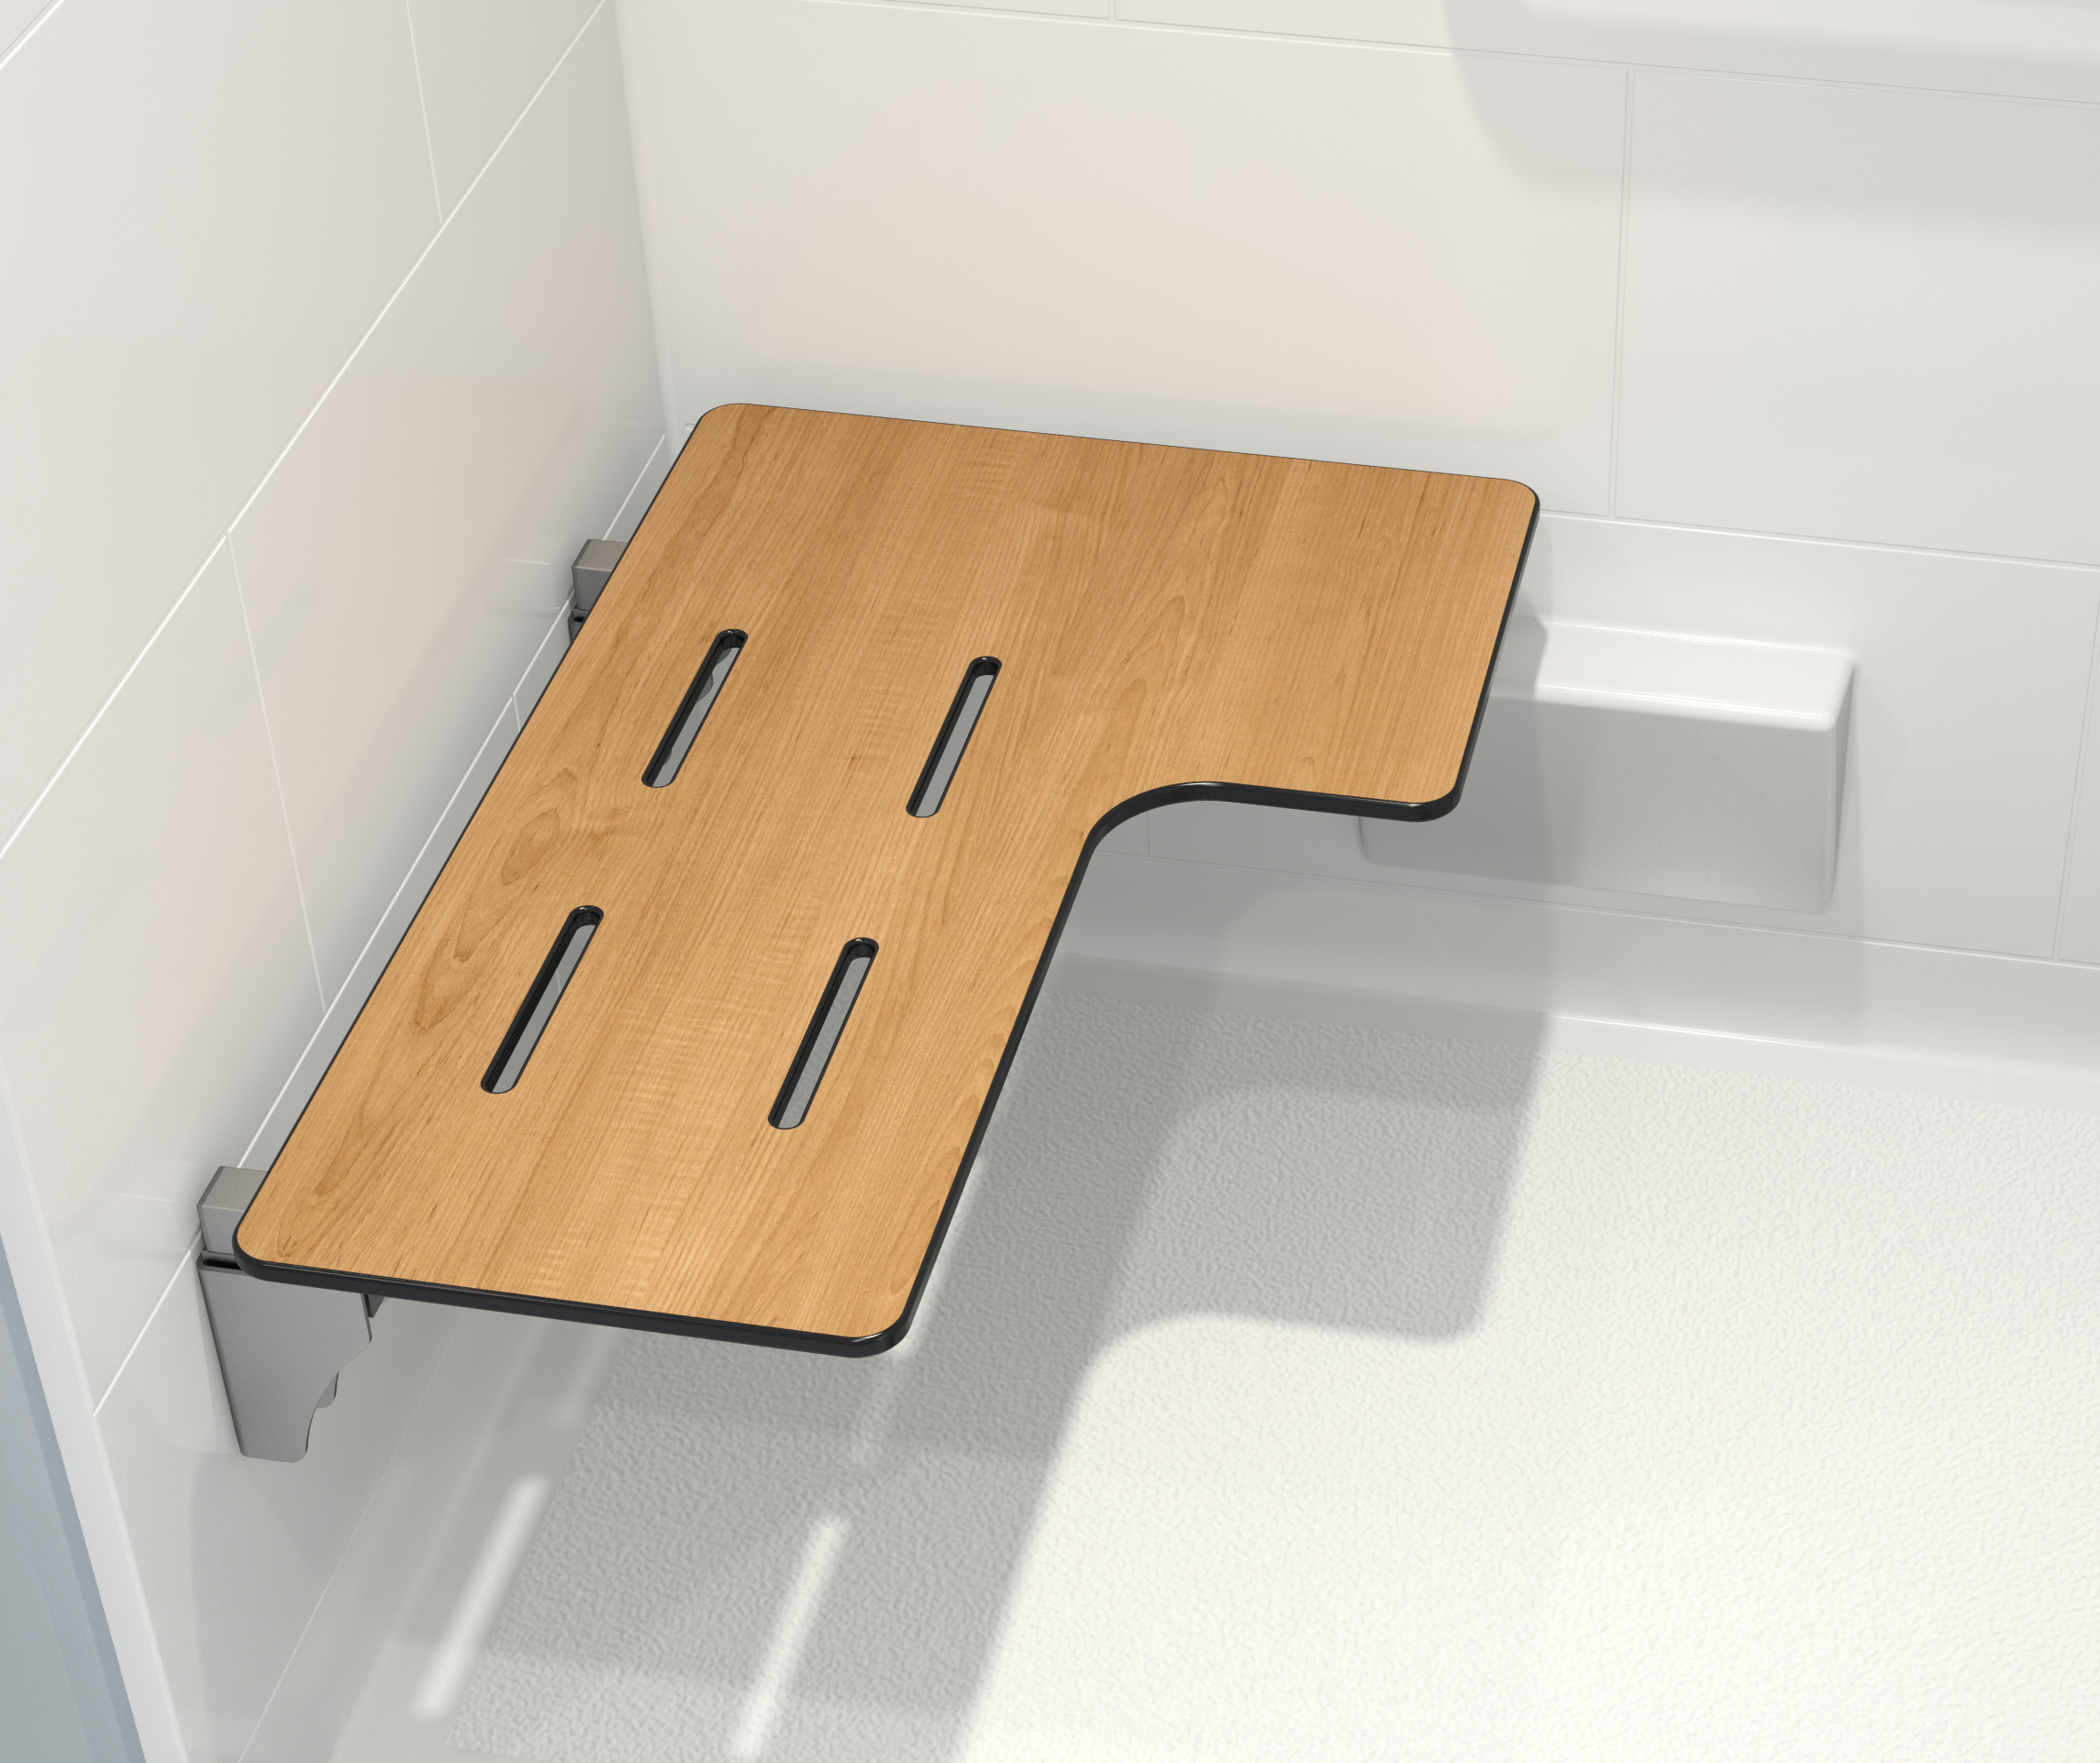 Bathroom Accessories - Shower Seats, Grab Bars, Storage and